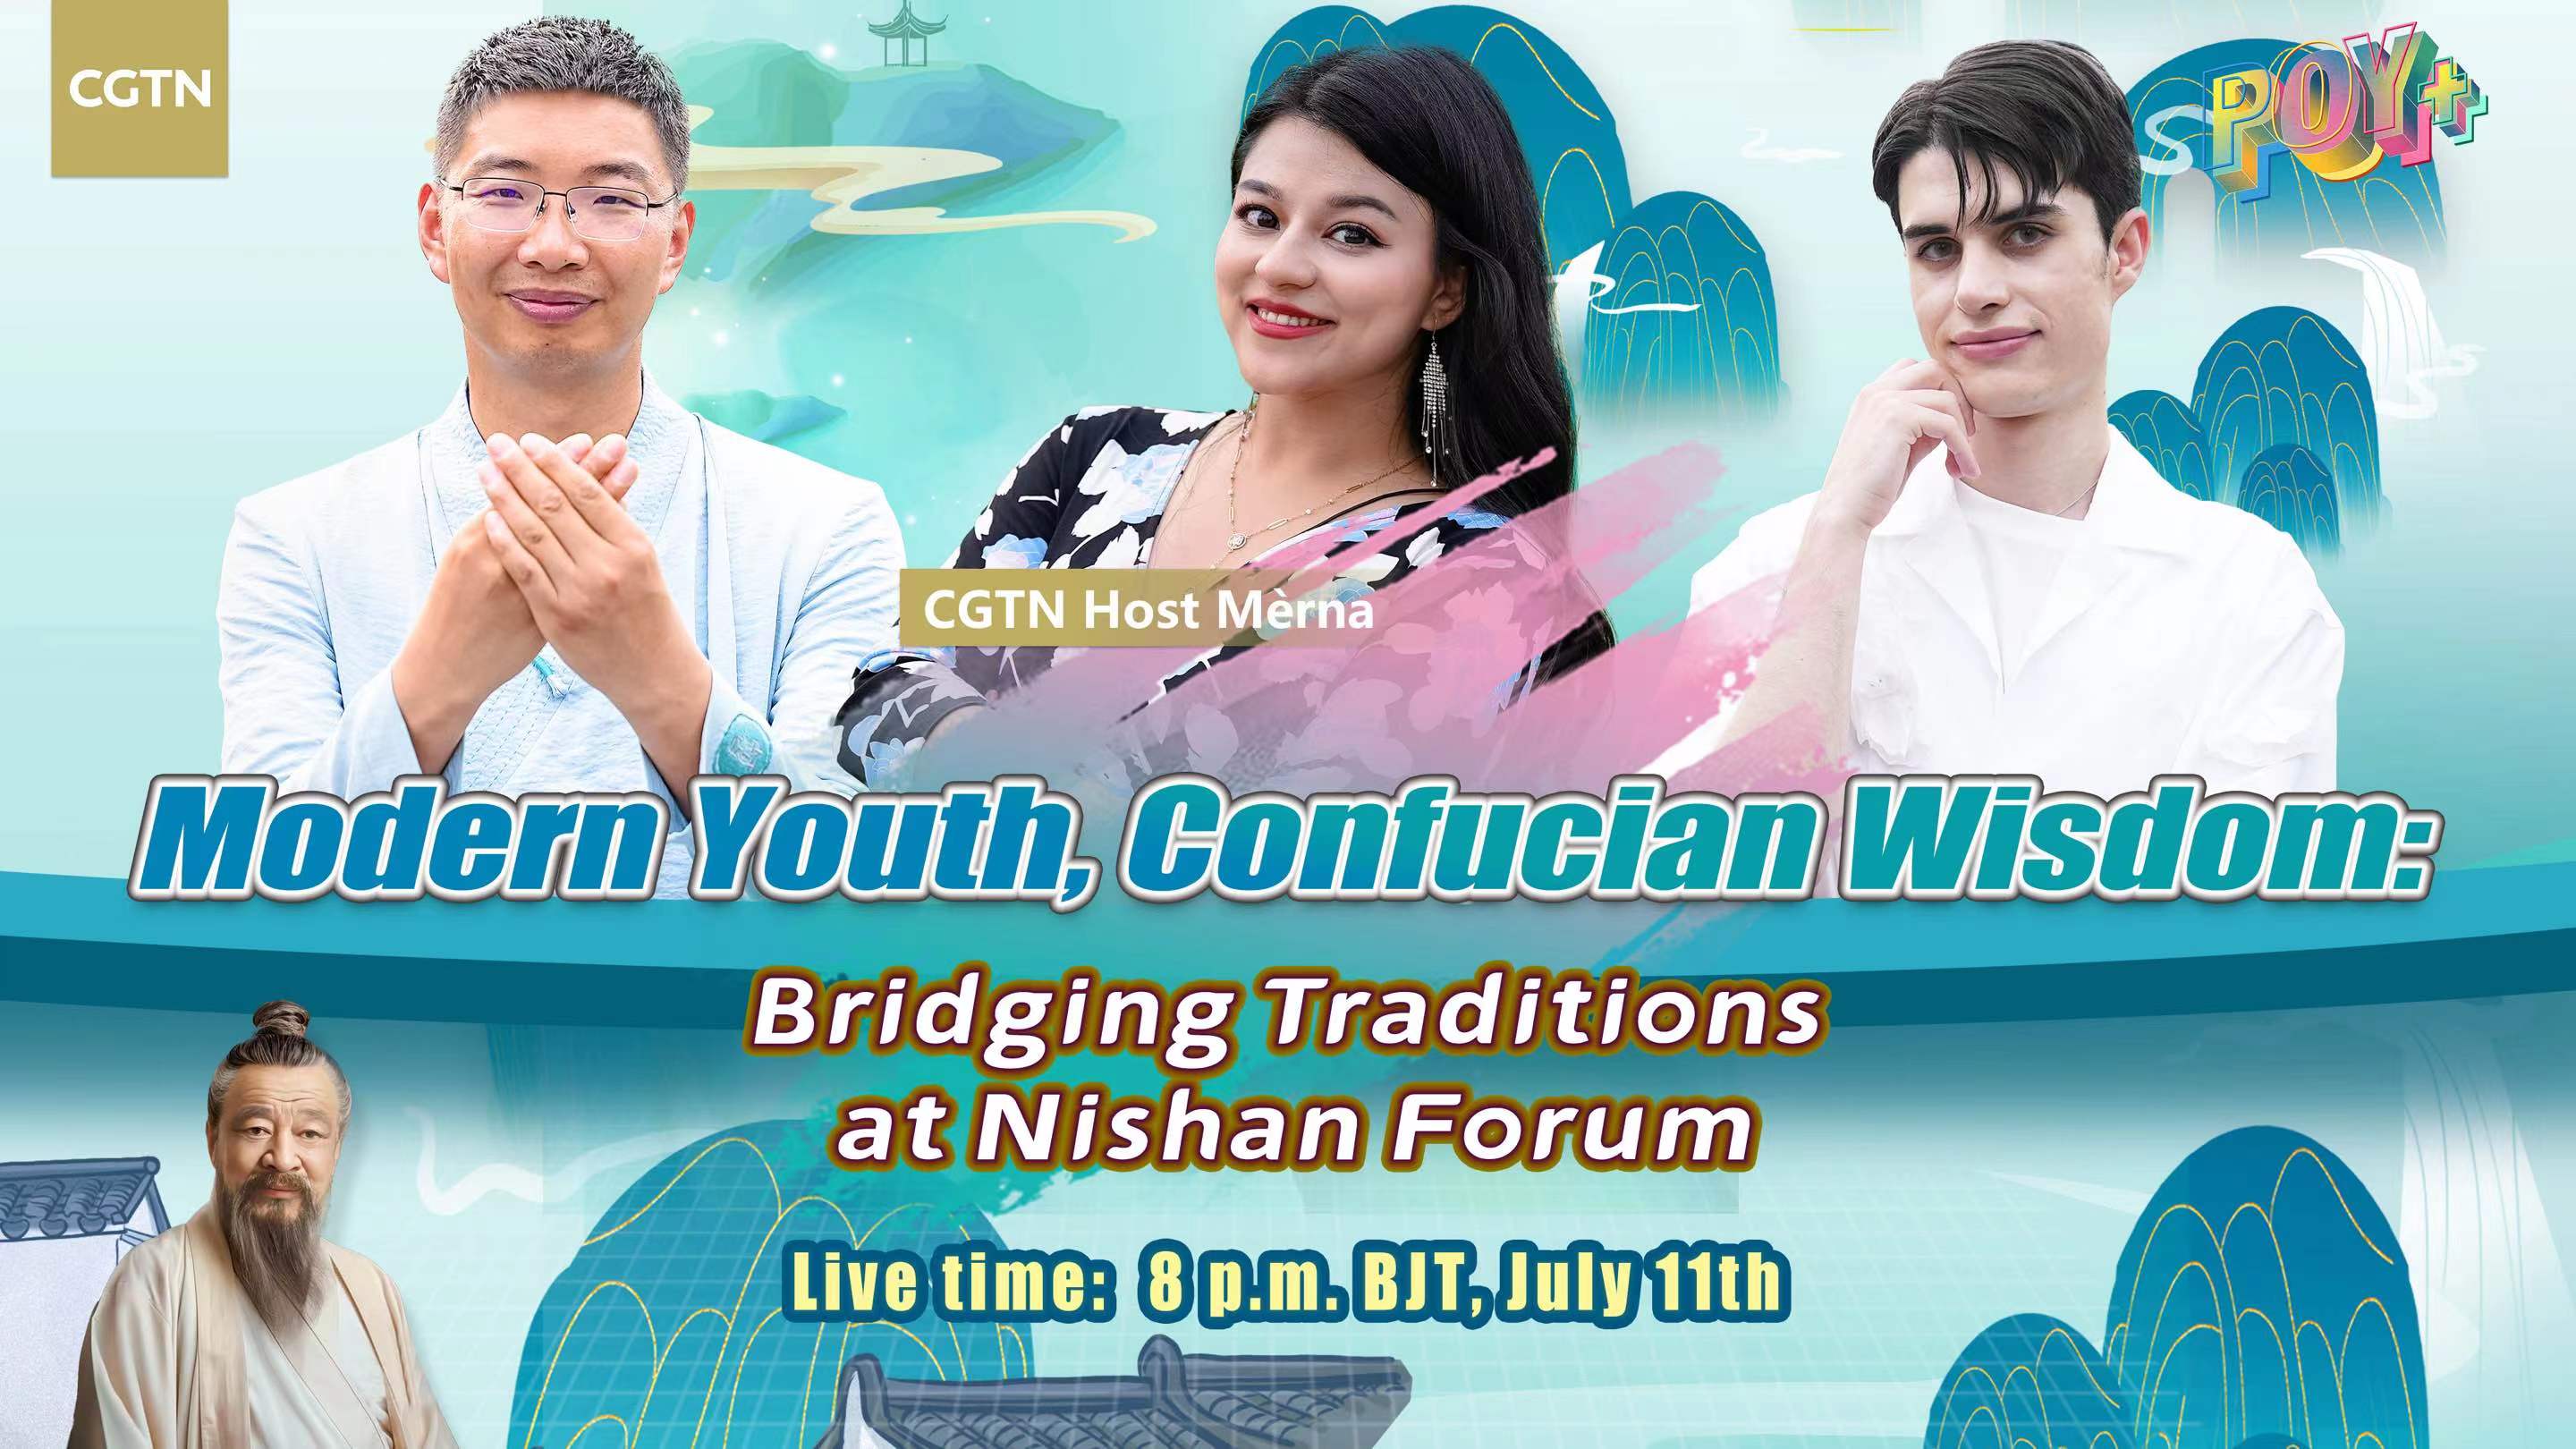 Live: Modern Youth, Confucian Wisdom – Bridging traditions at the Nishan Forum